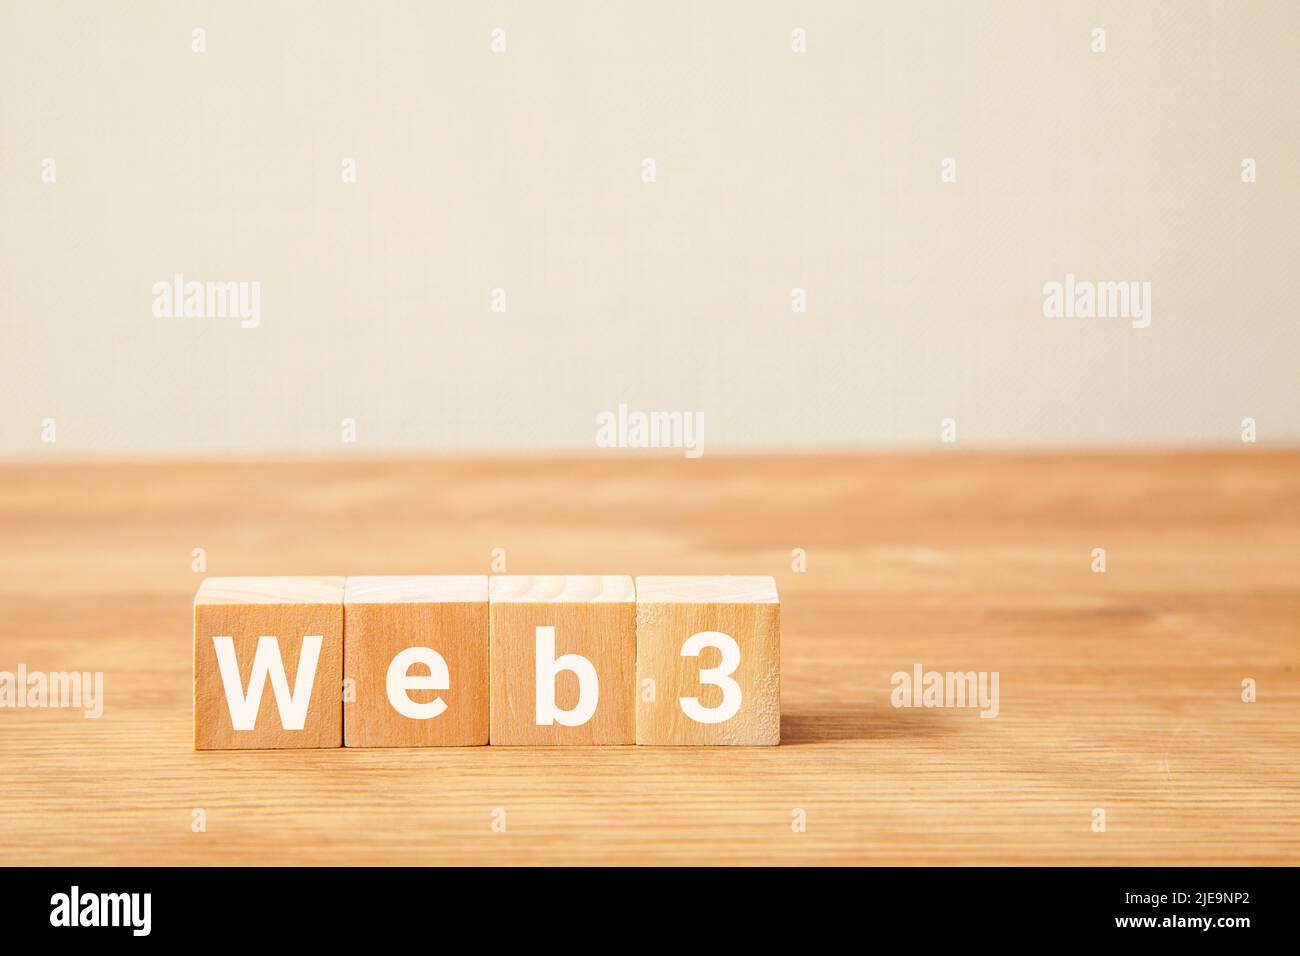 web3 characters. Written on four wooden blocks. White letters. Wooden table background. Stock Photo